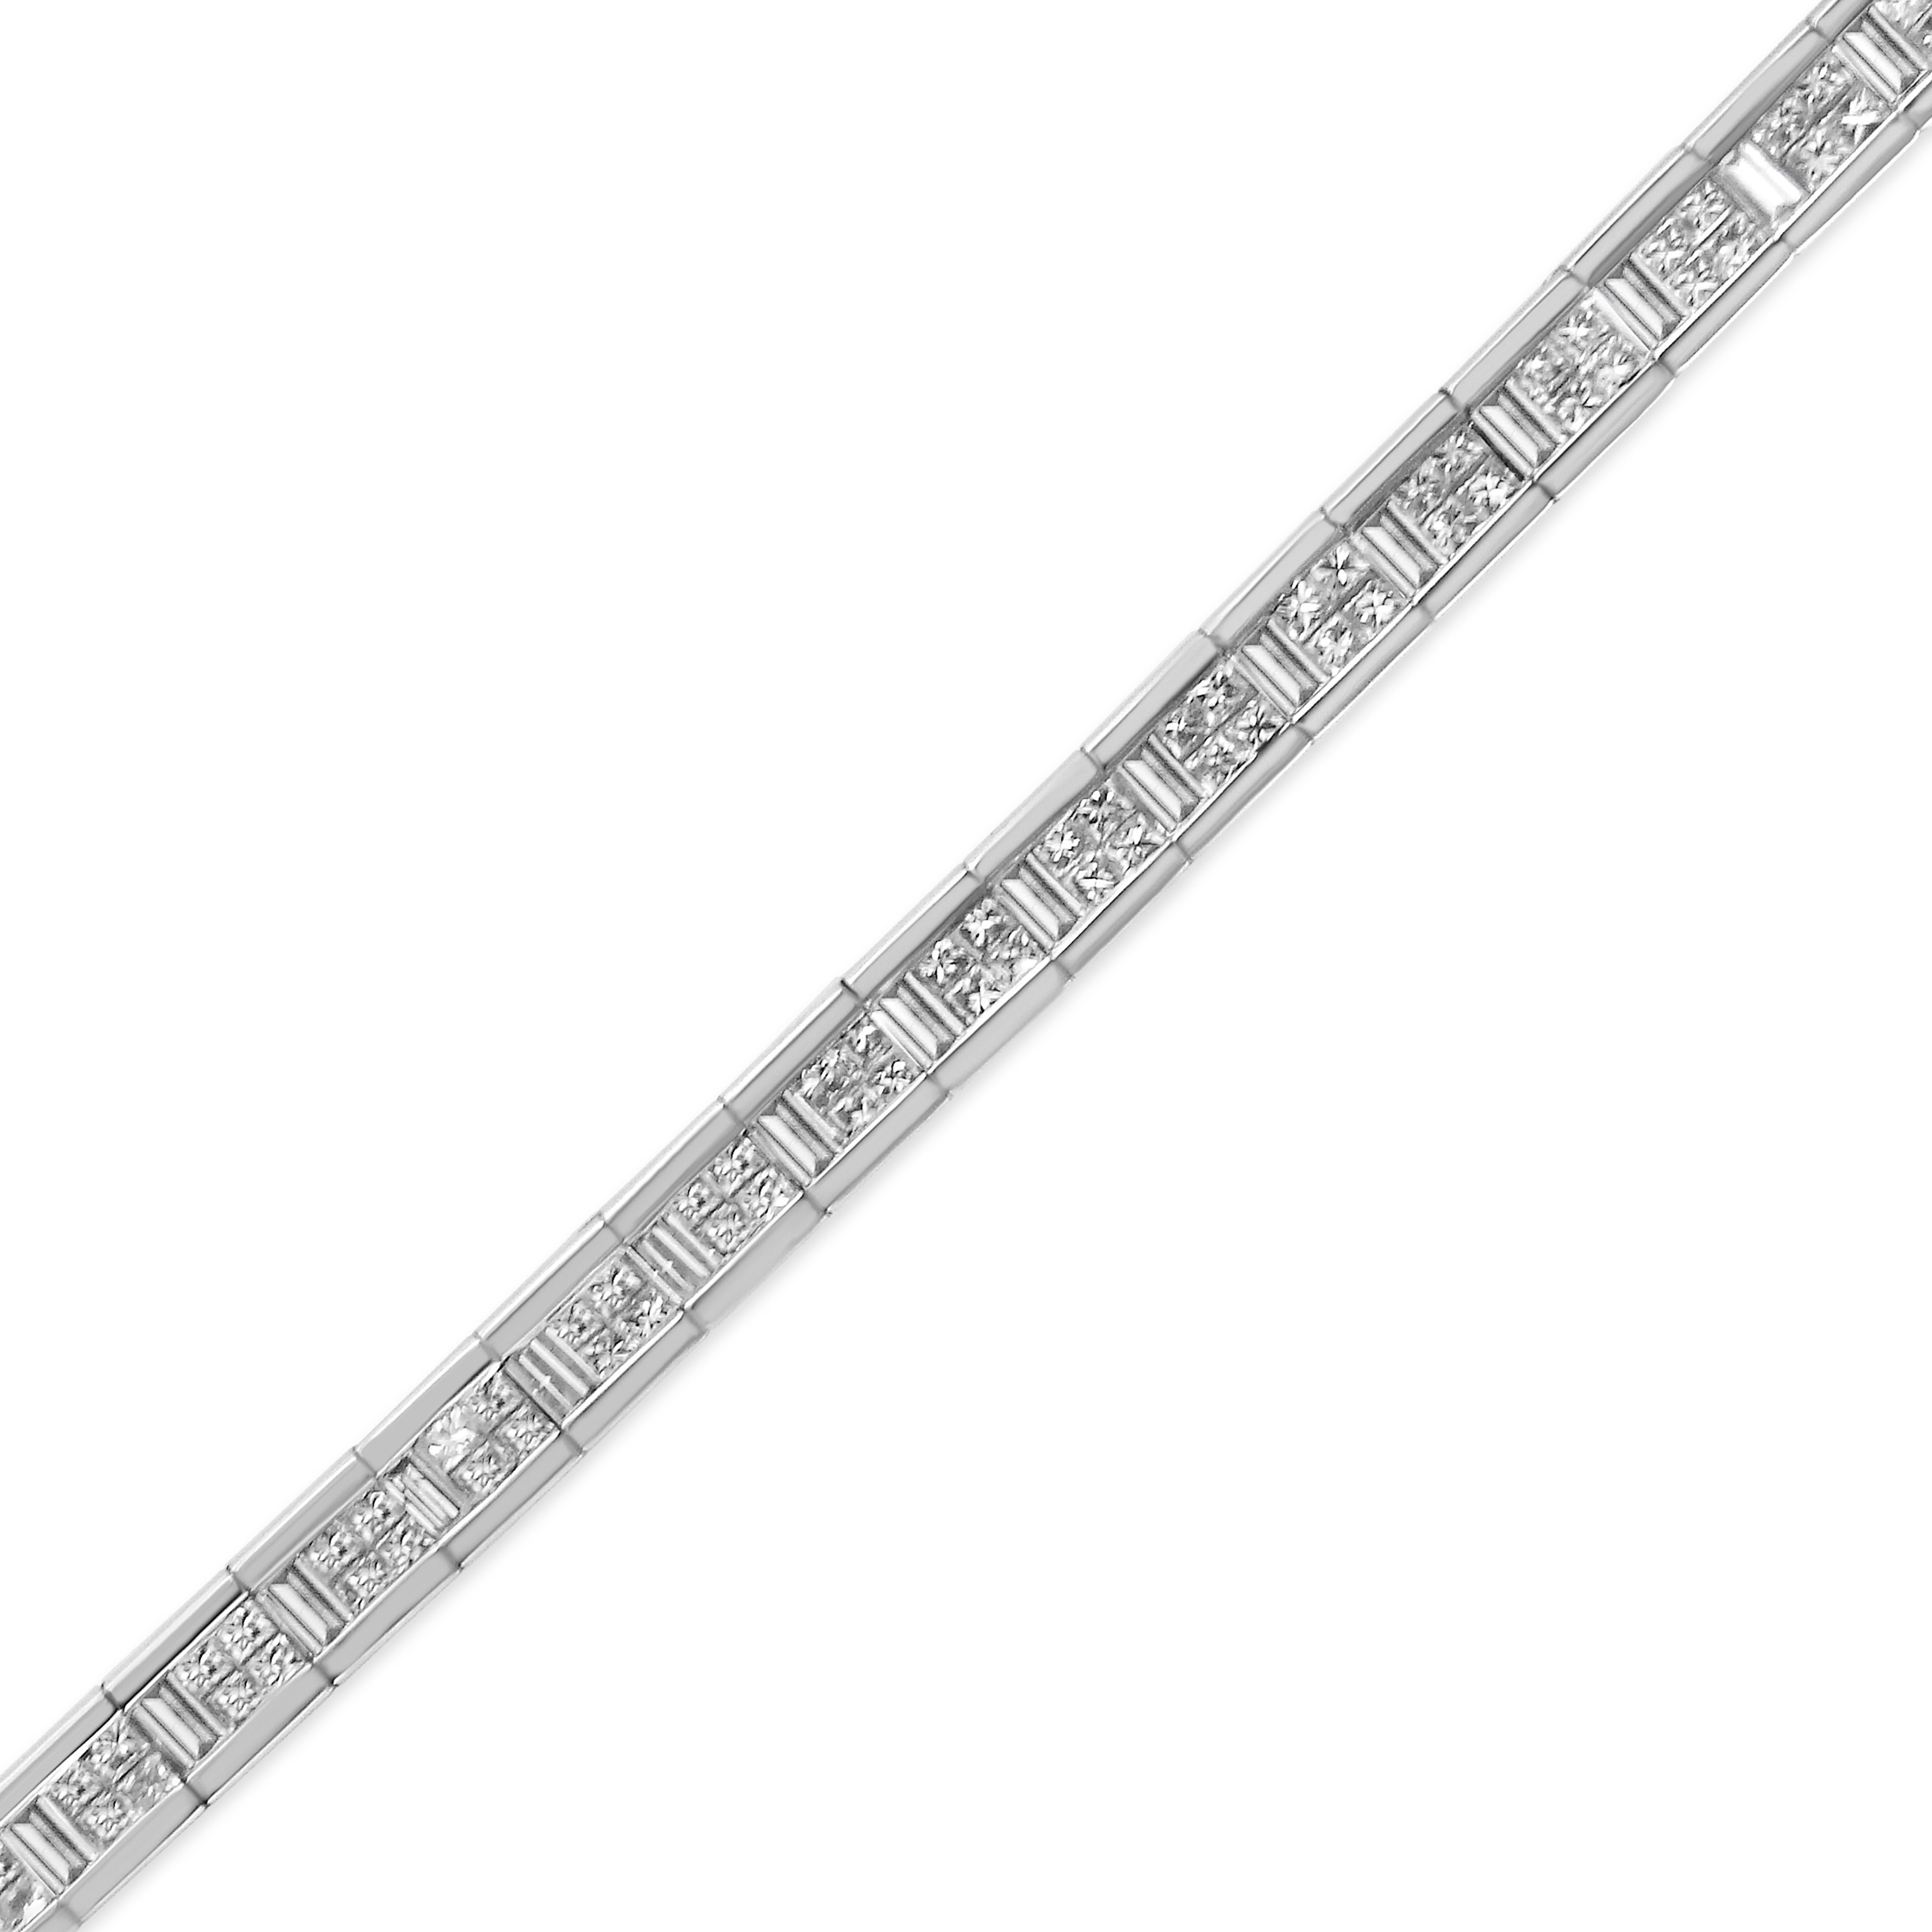 Surround her with love with this beautiful, classic tennis bracelet. This bracelet is crafted from cool weaves of 14k white gold and features a dazzling array of 220 princess cut and baguette cut natural diamonds. Artisanally crafted,  this bracelet